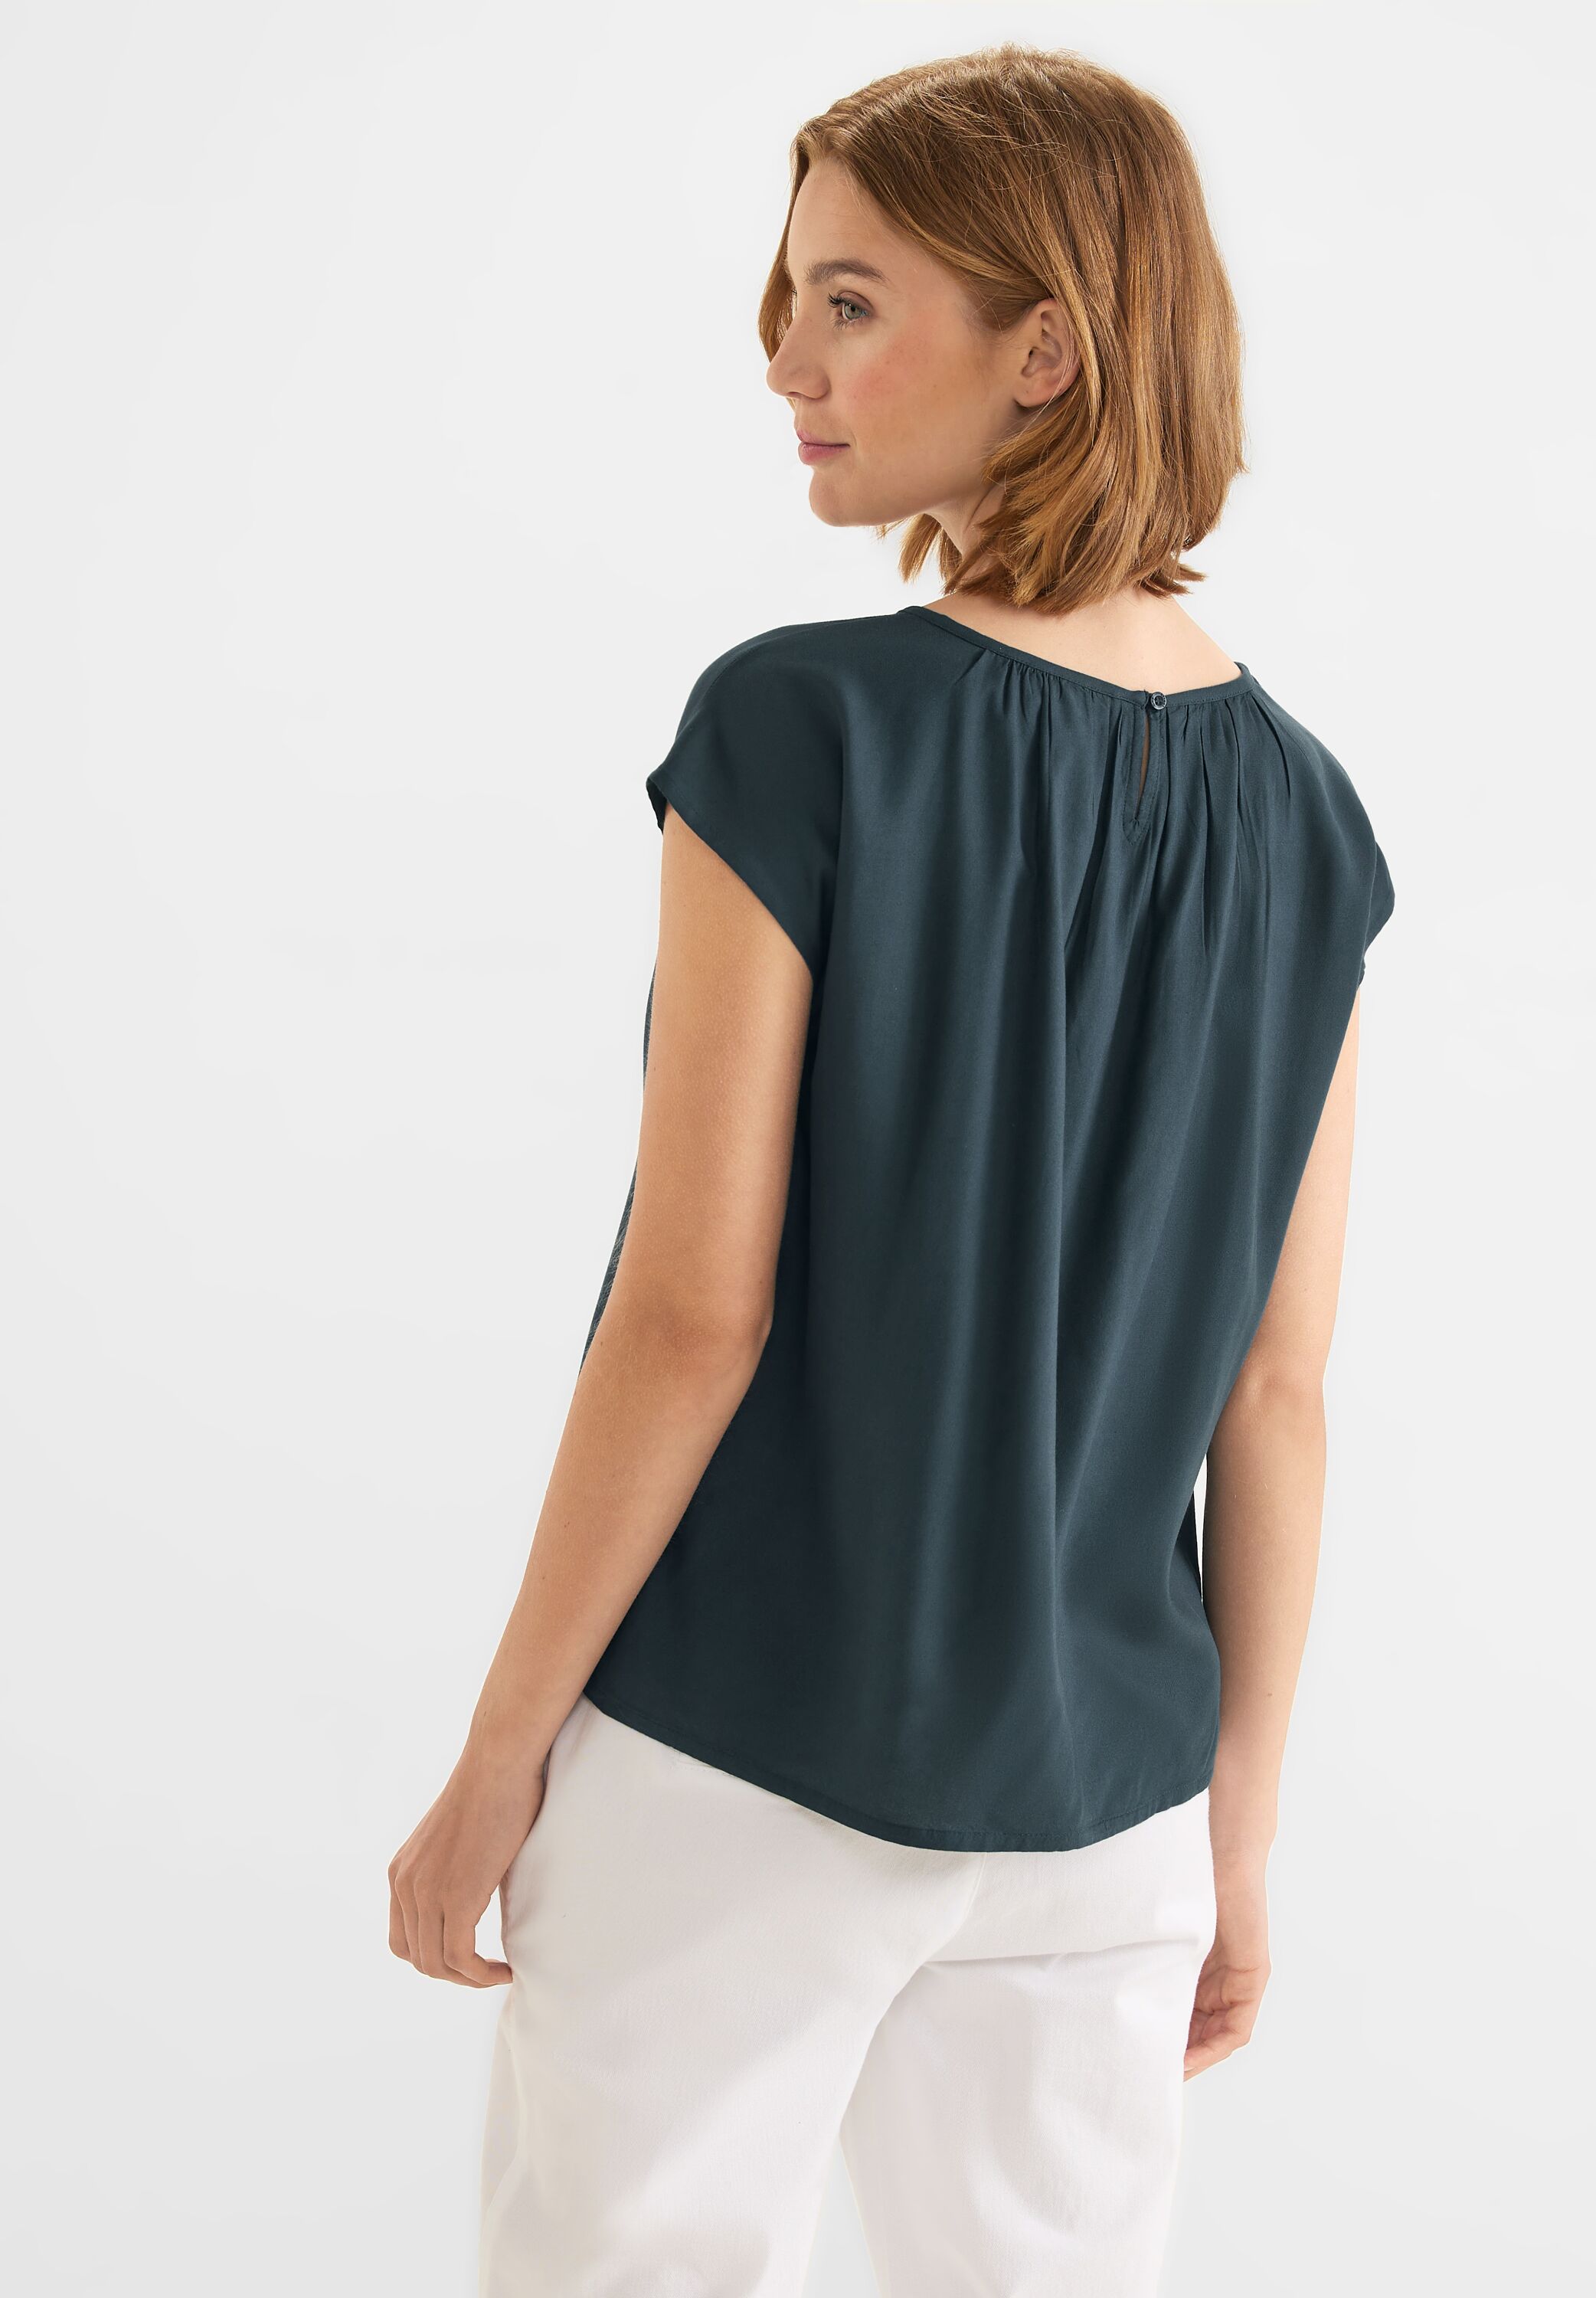 Street One Shirtbluse in Cool reduziert Vintage - Mode A343920-13825 Green im SALE CONCEPT